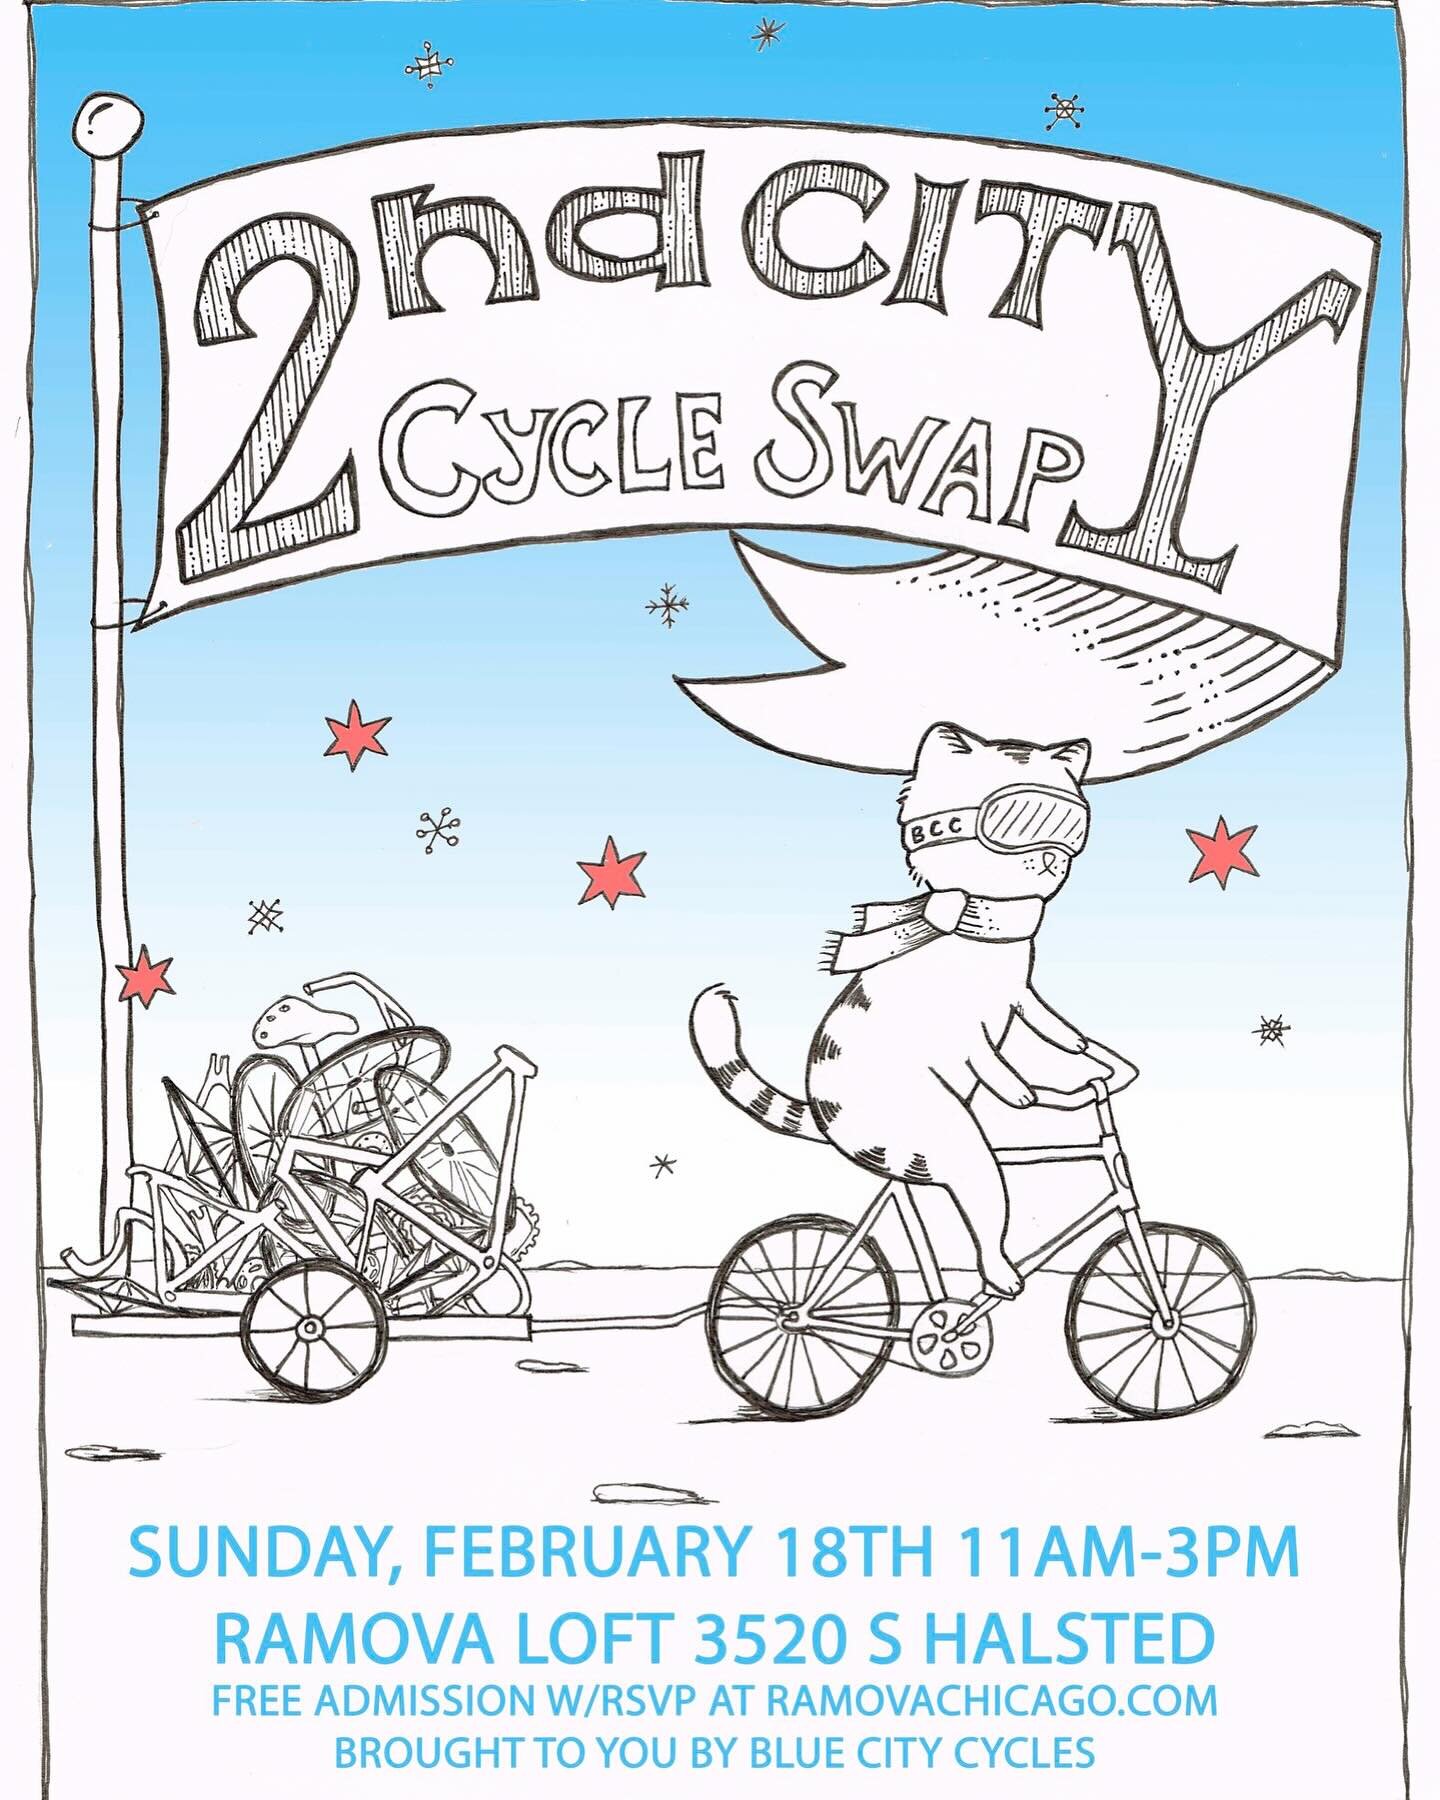 This Sunday!! @bluecitycycles organized a bike swap! Chris will be there with a table of discounted parts and accessories. There will be a bunch of other vendors, too, with rare goodies, vintage parts, cool bikes. It should be fun and a good chance t